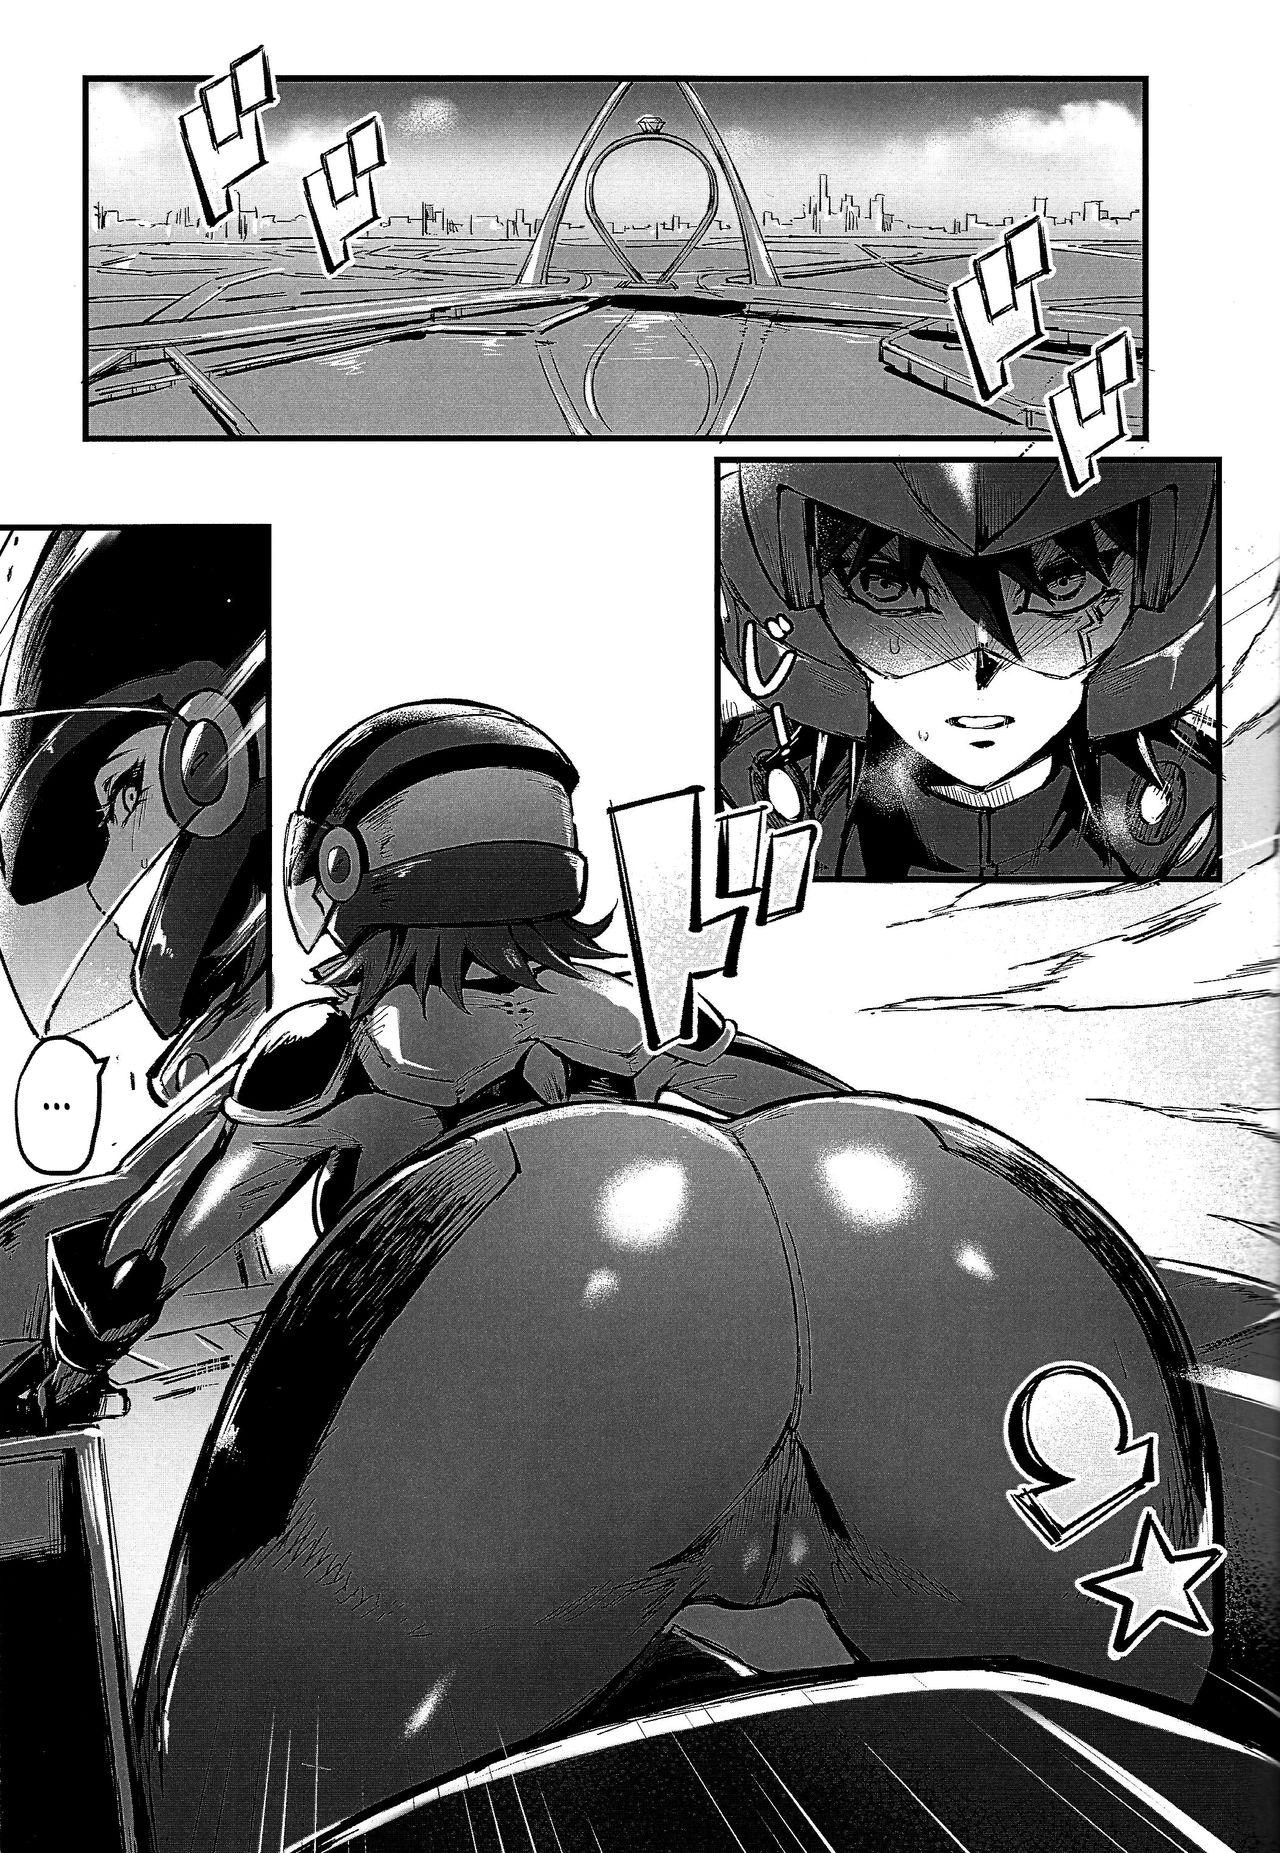 Parody MASK of D. - Yu-gi-oh 5ds Nudes - Page 2